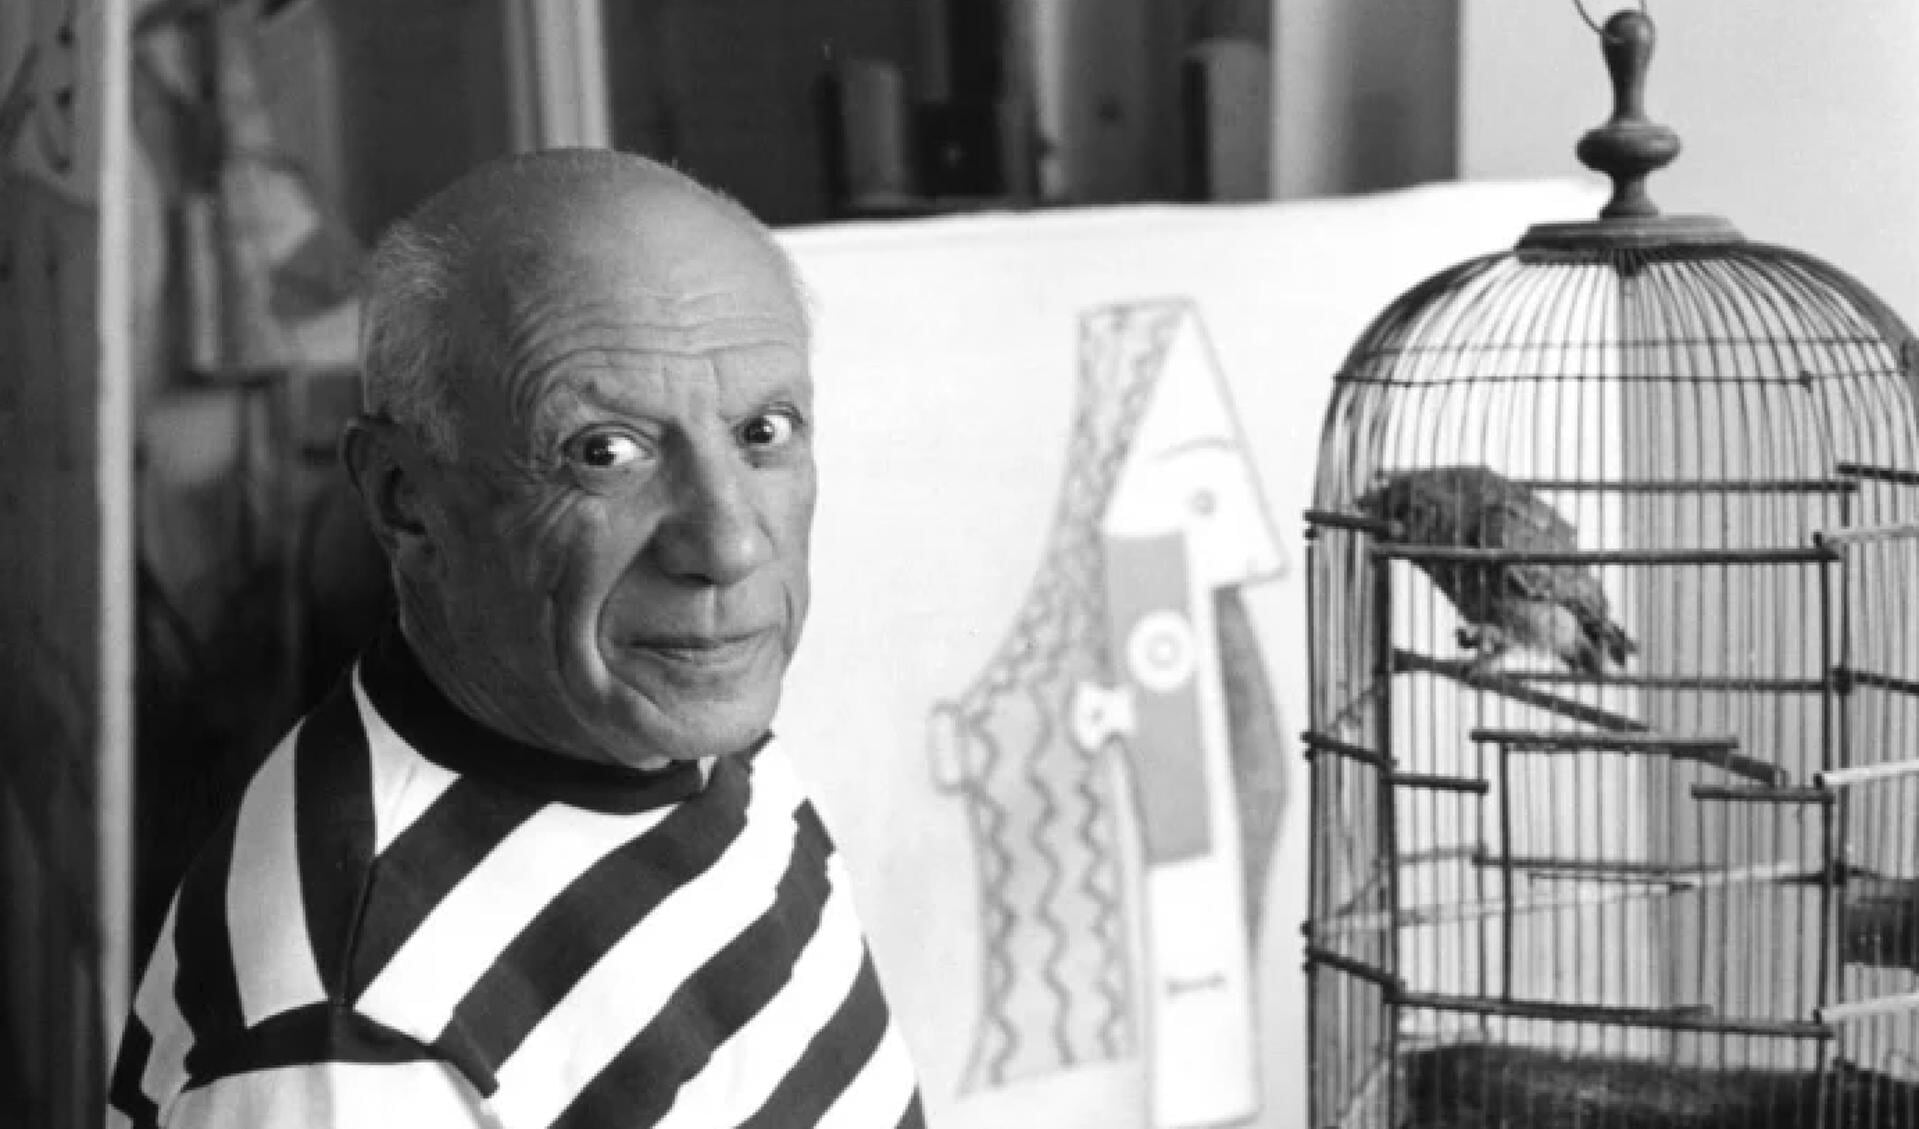 Picasso in 1957